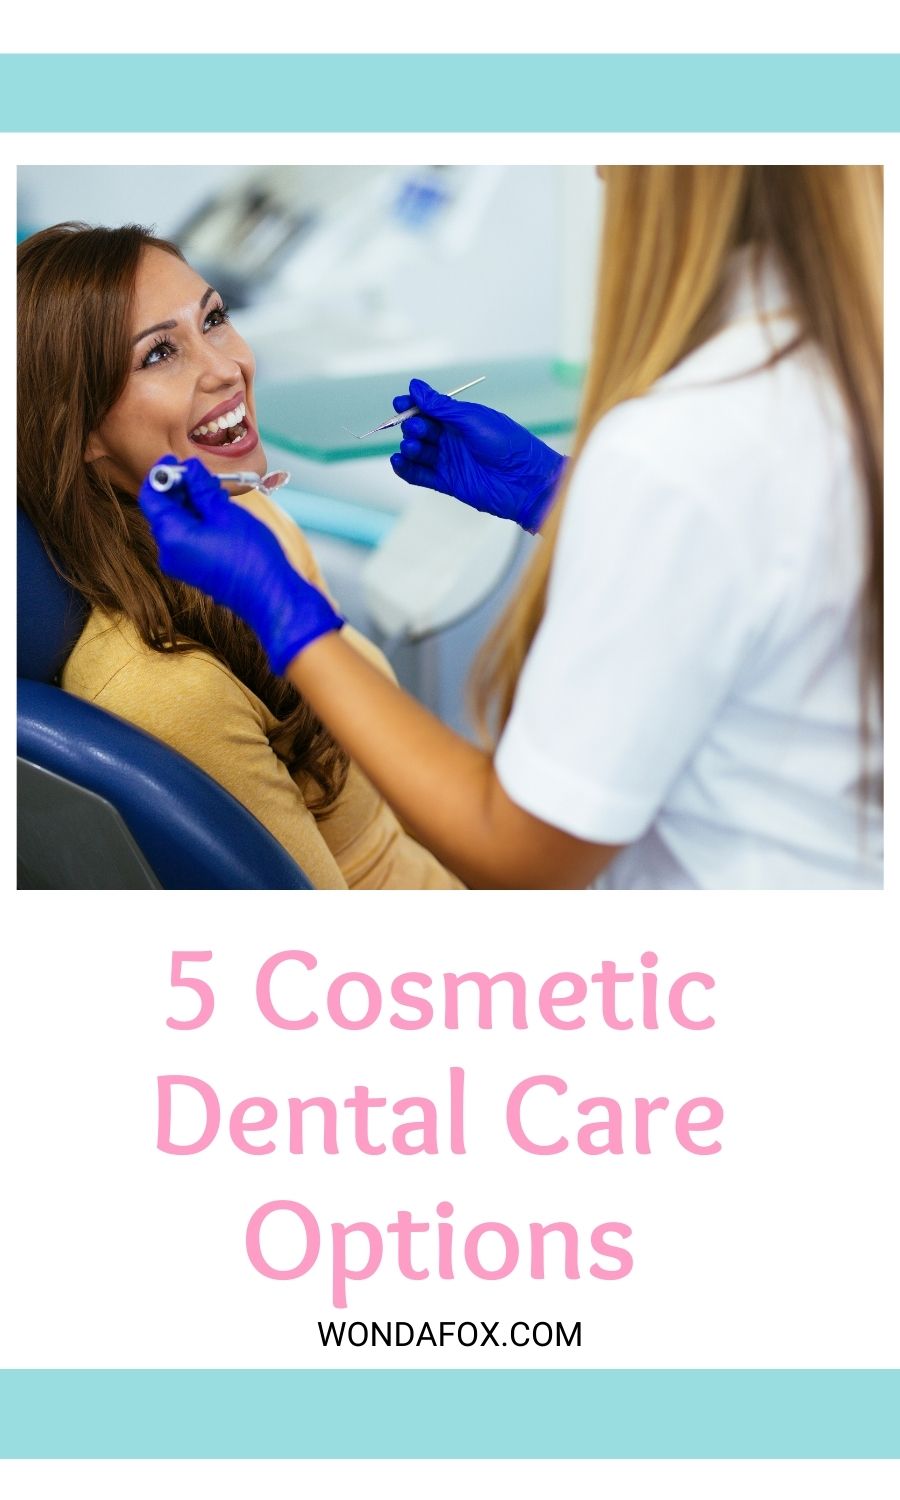 5 cosmetic dental care options